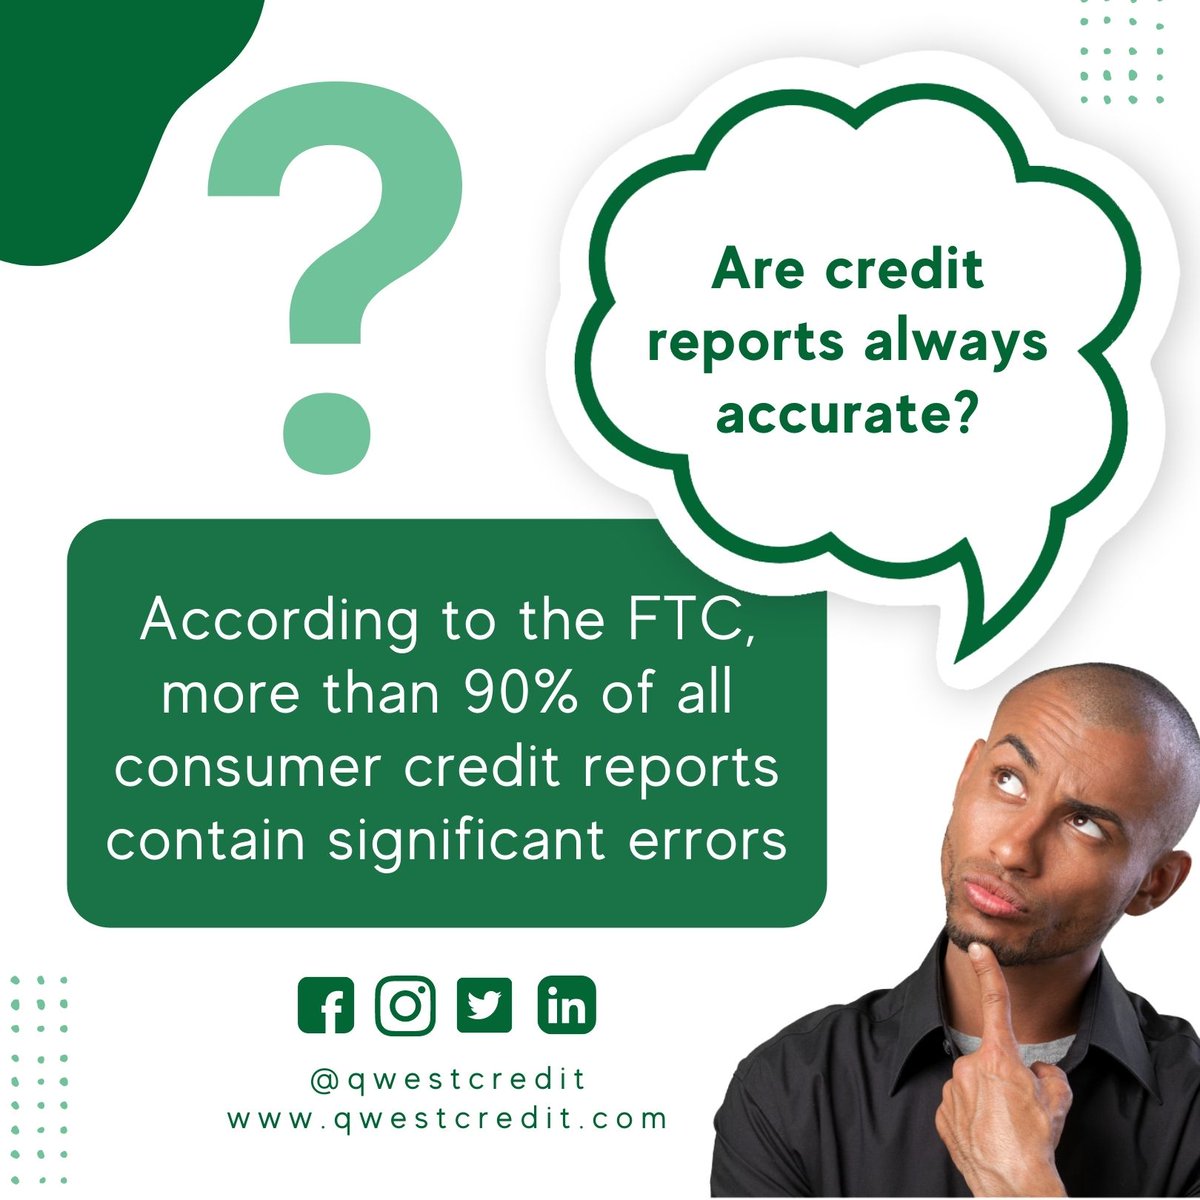 9 out of 10 Americans find errors on their credit file, according to a FTC survey done on Americans' credit reports.

Submit your case to be reviewed by our experts using the link in our bio.
.
#credit #creditreport #creditservices #credittips #crediteducation #creditaccuracy